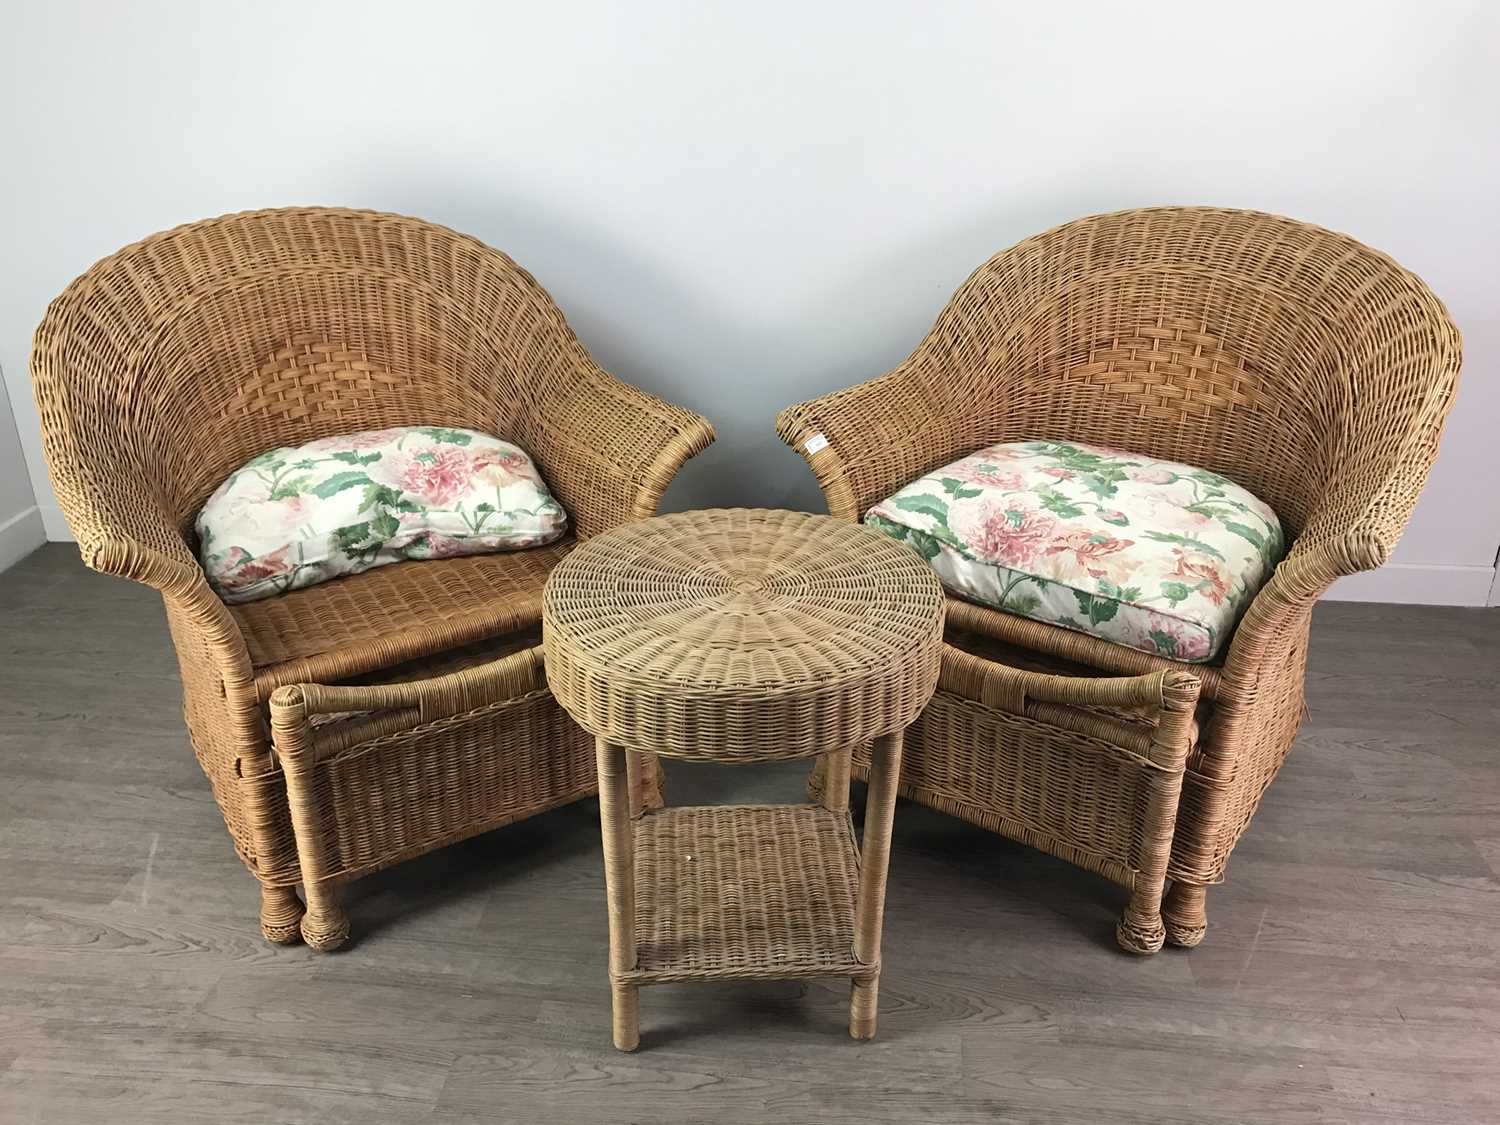 Lot 557 - A PAIR OF WICKER CHAIRS AND A SMALL TABLE